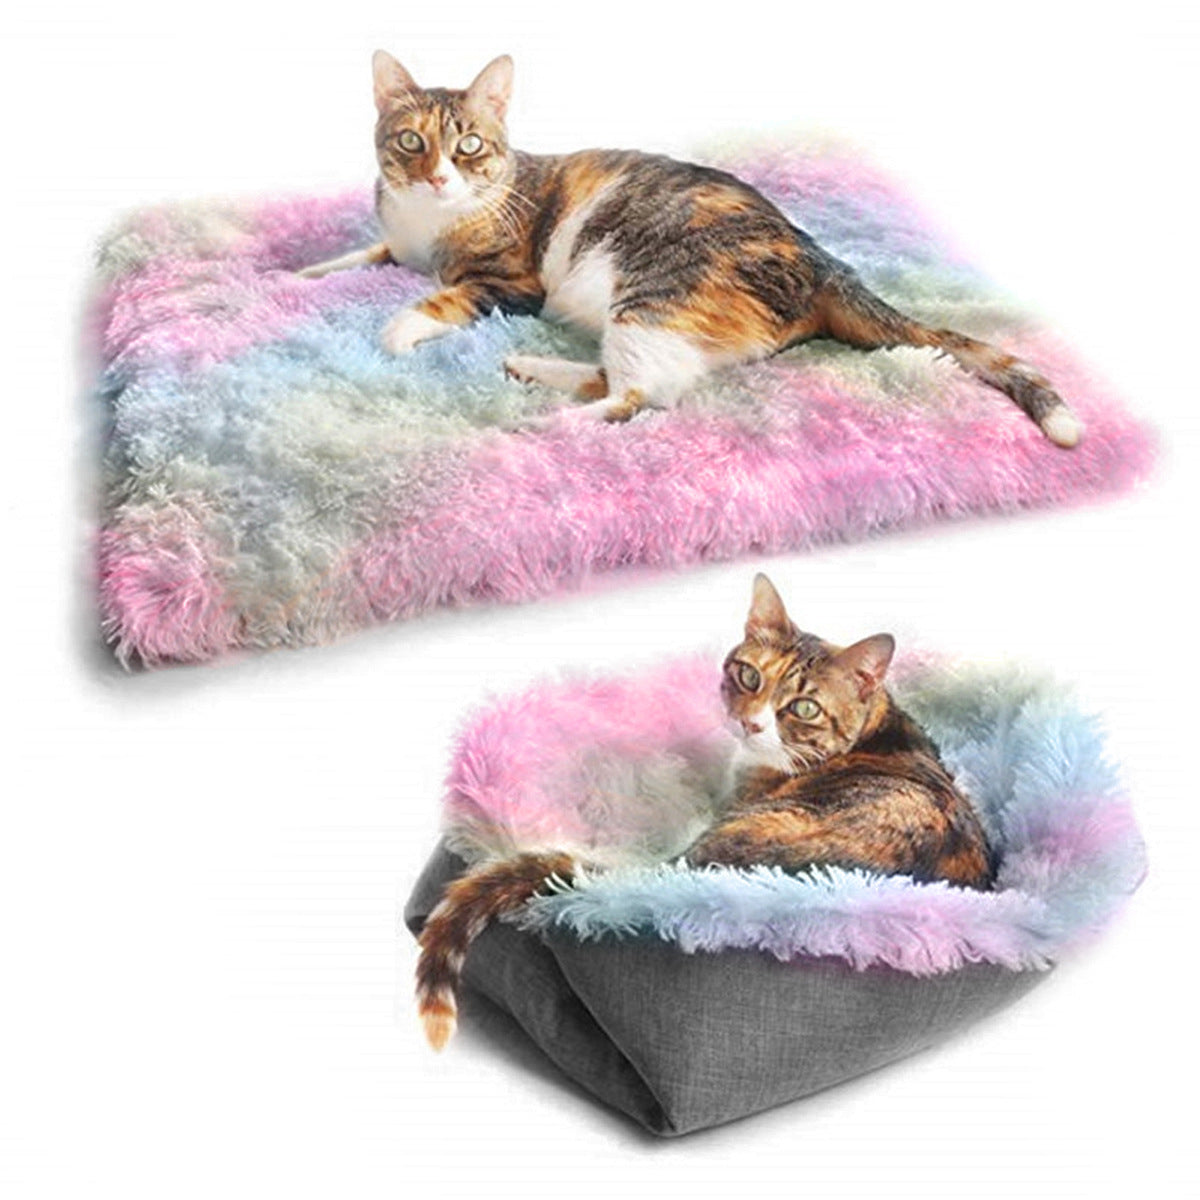 The Cuddler - Pet Bed - 2 in 1 mat with bed